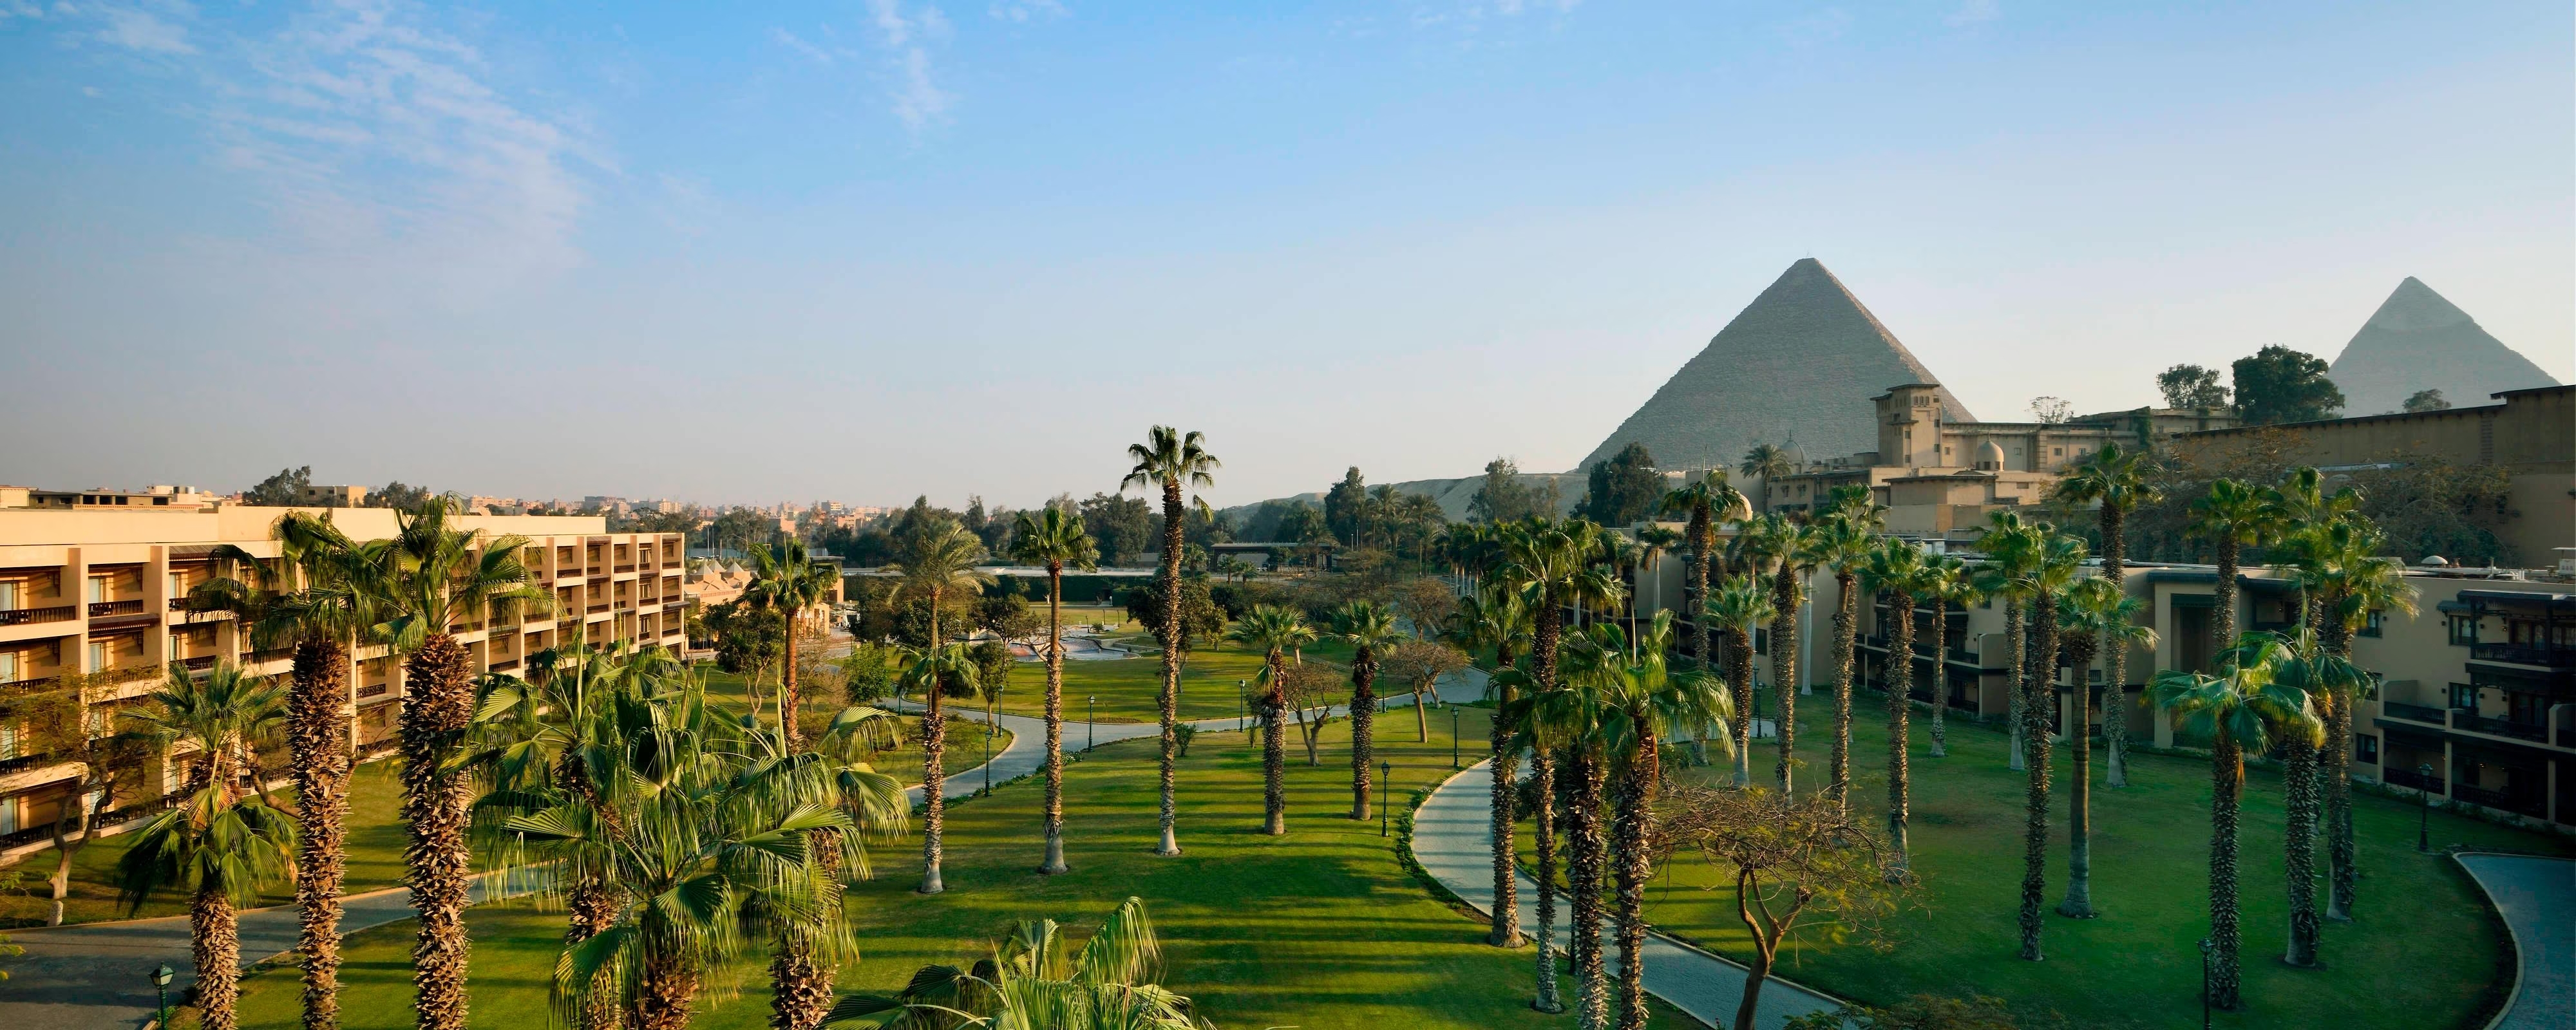 How to spend Luxury Tours of Egypt?